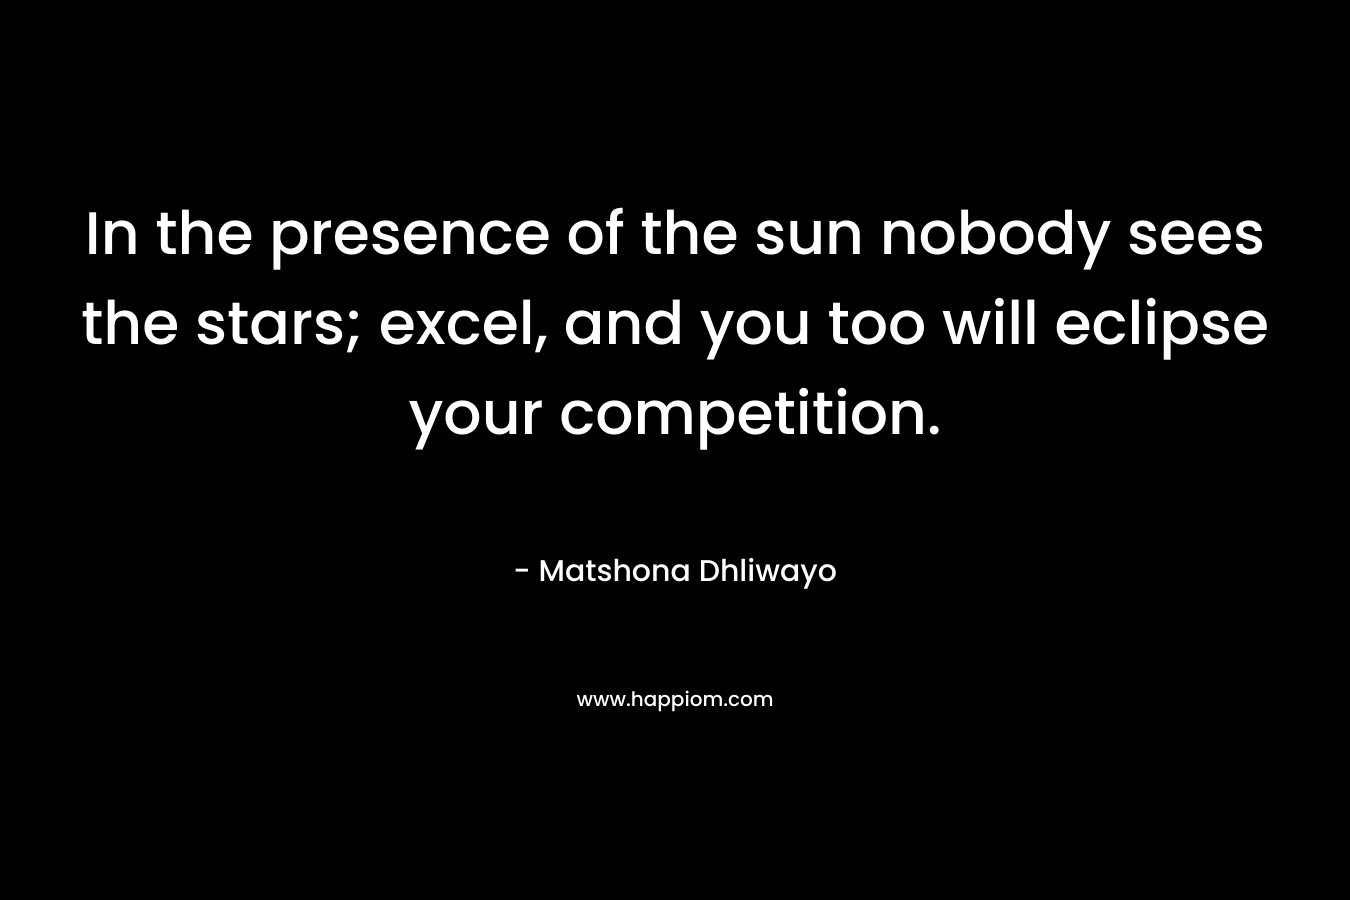 In the presence of the sun nobody sees the stars; excel, and you too will eclipse your competition.